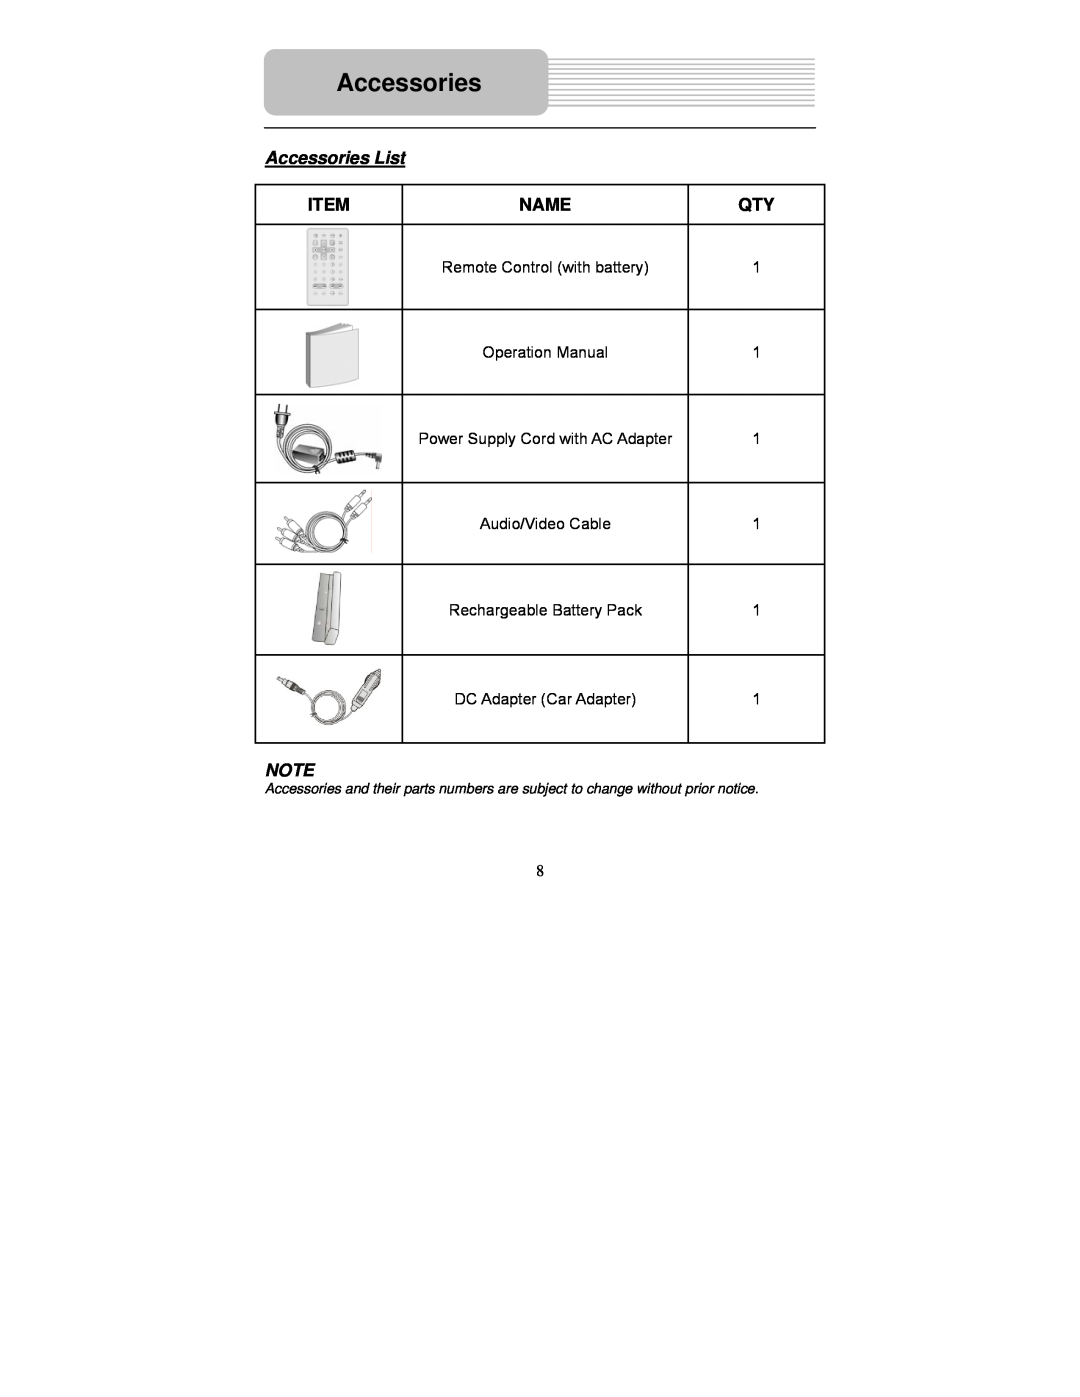 Polaroid PDM-0725 operation manual Accessories List, Name 